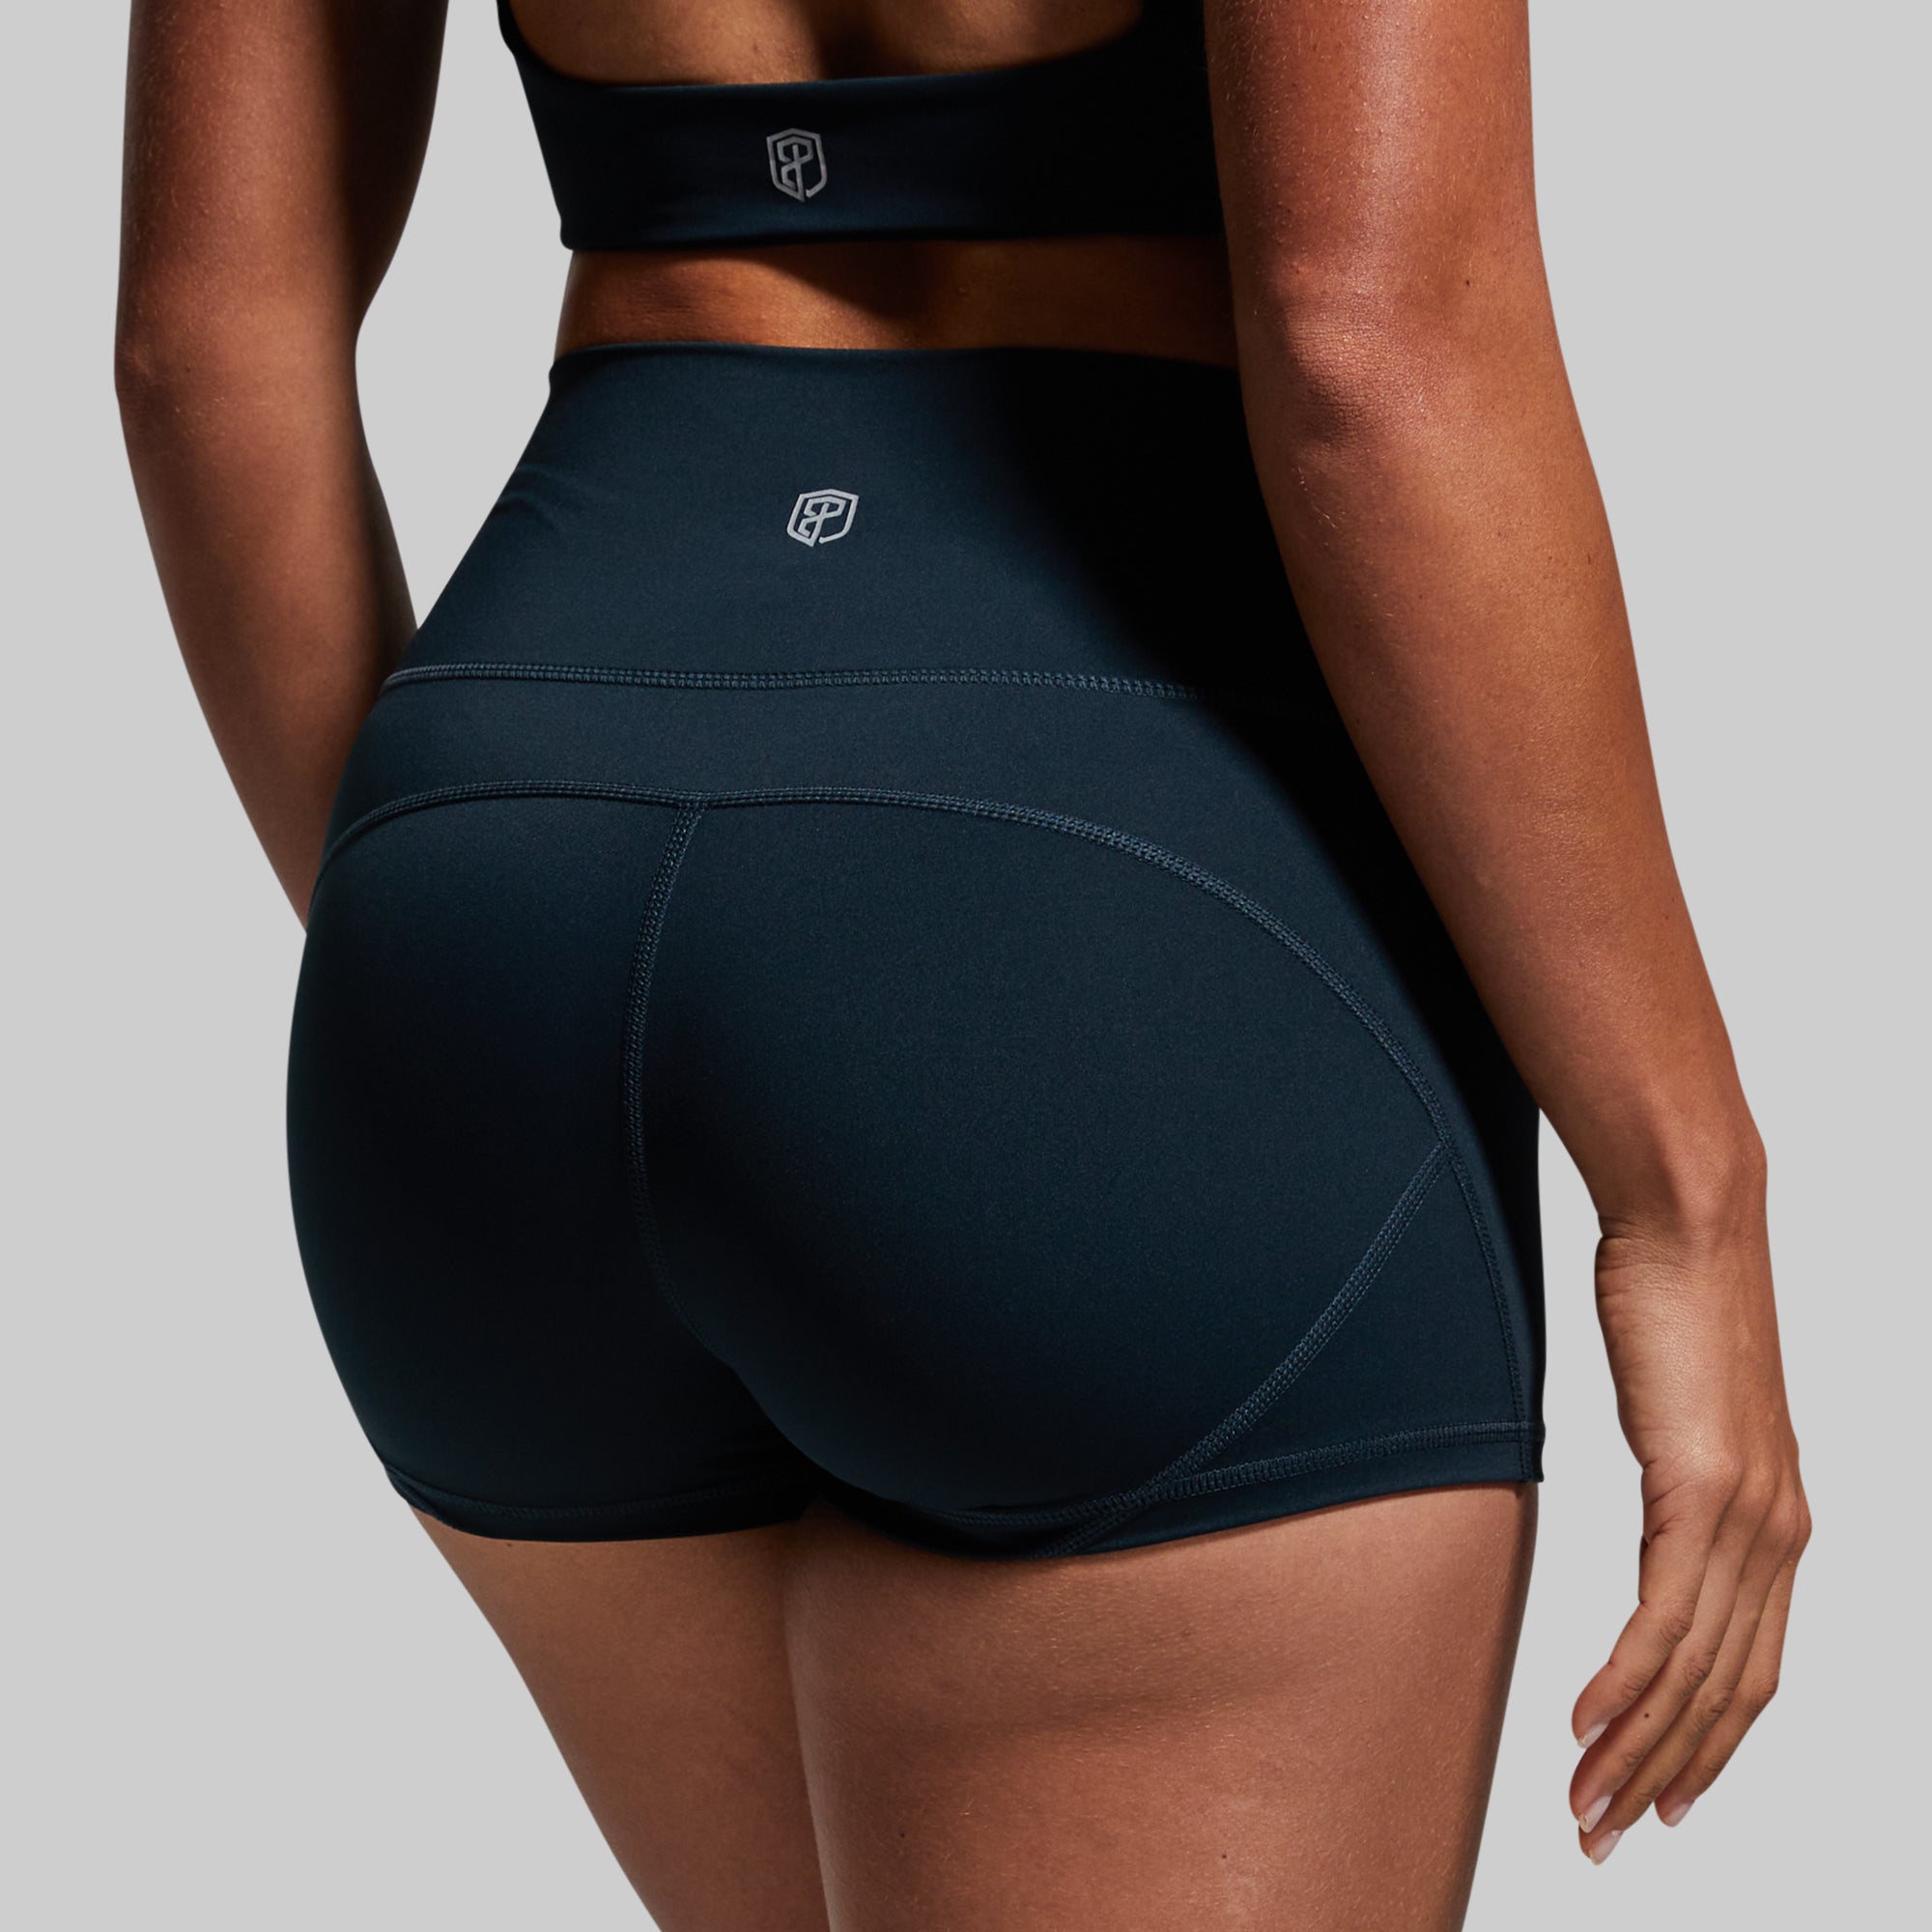 What are your thoughts on the new Everlux/Mesh training collection? : r/ lululemon